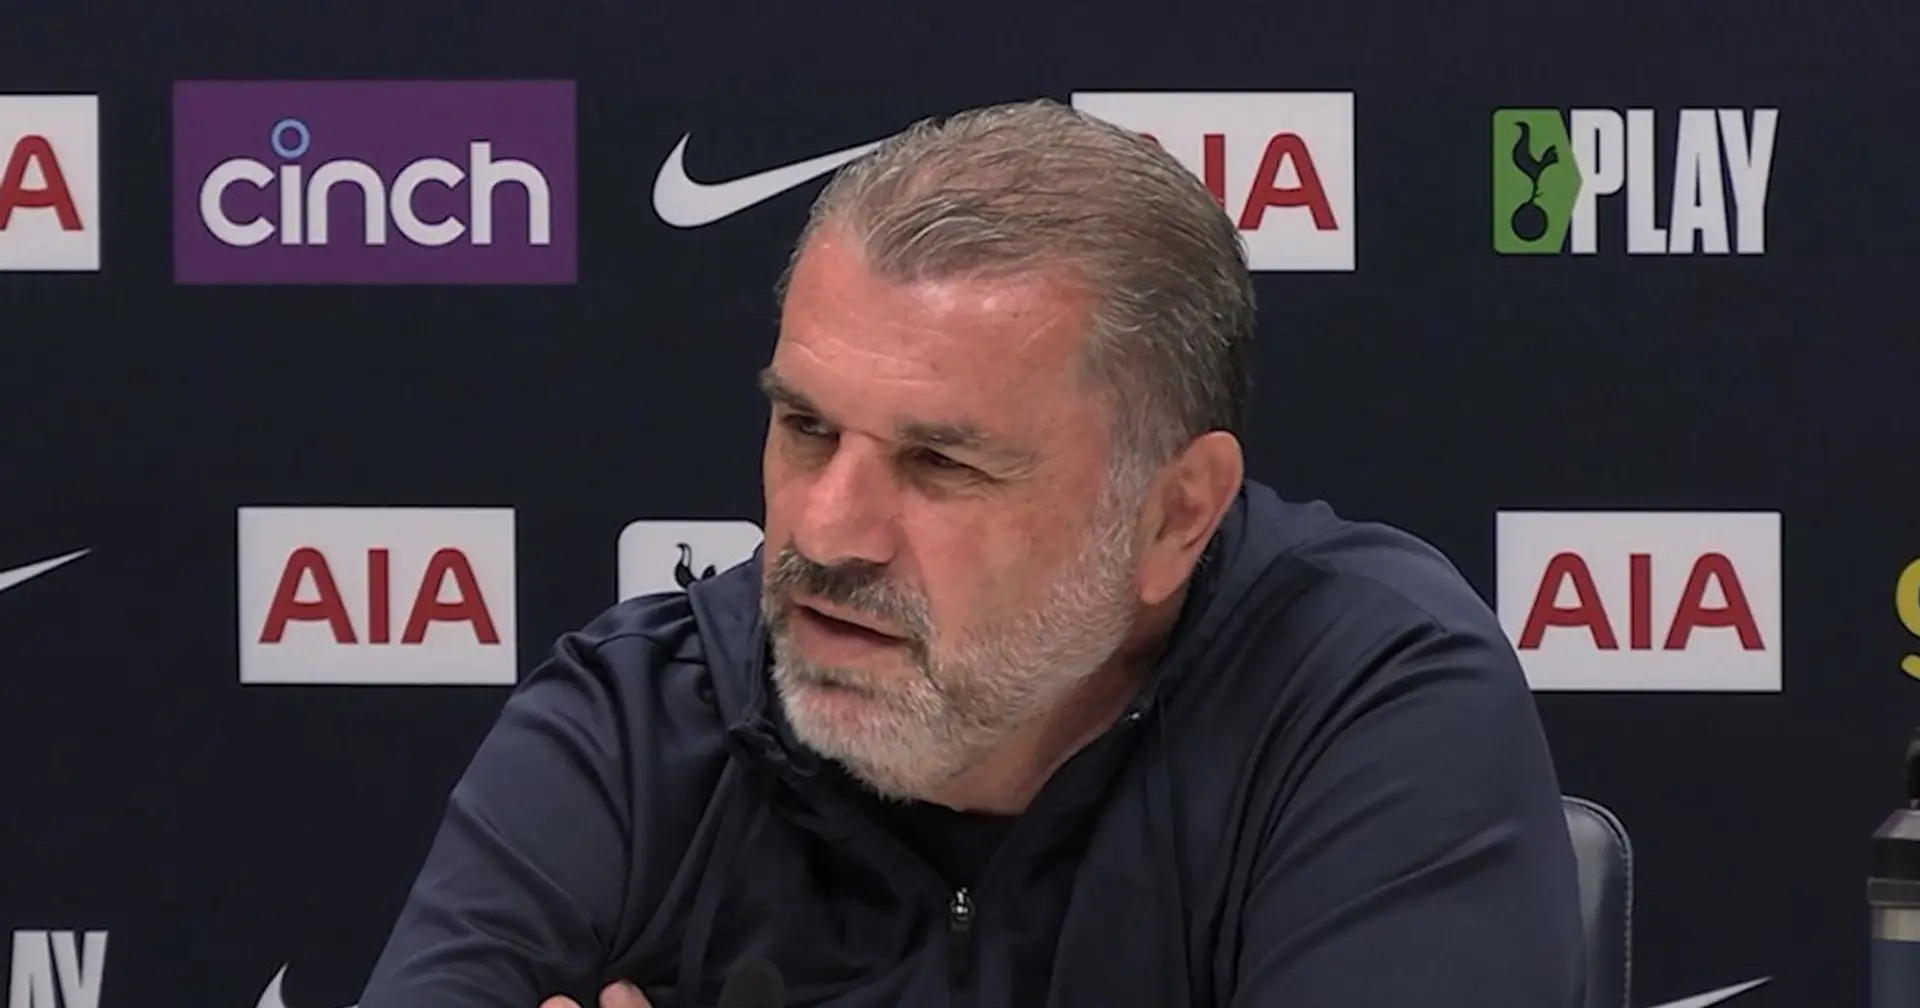 'I'm not just going to watch them win': Postecoglou vows Spurs won't roll out a red carpet for City